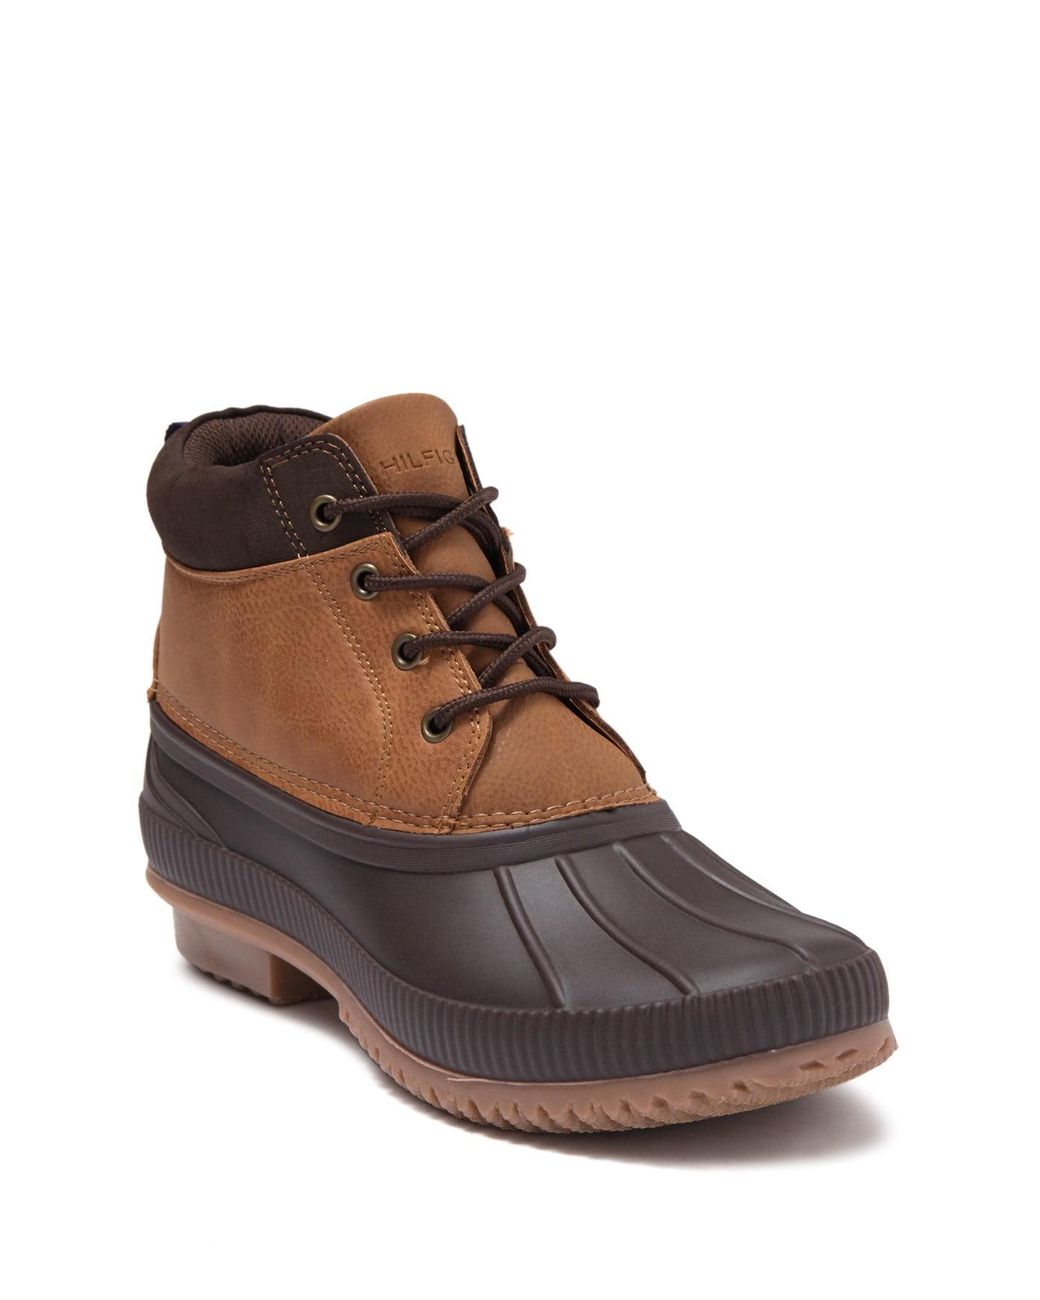 Tommy Hilfiger Celcius 2 Duck Boot for 